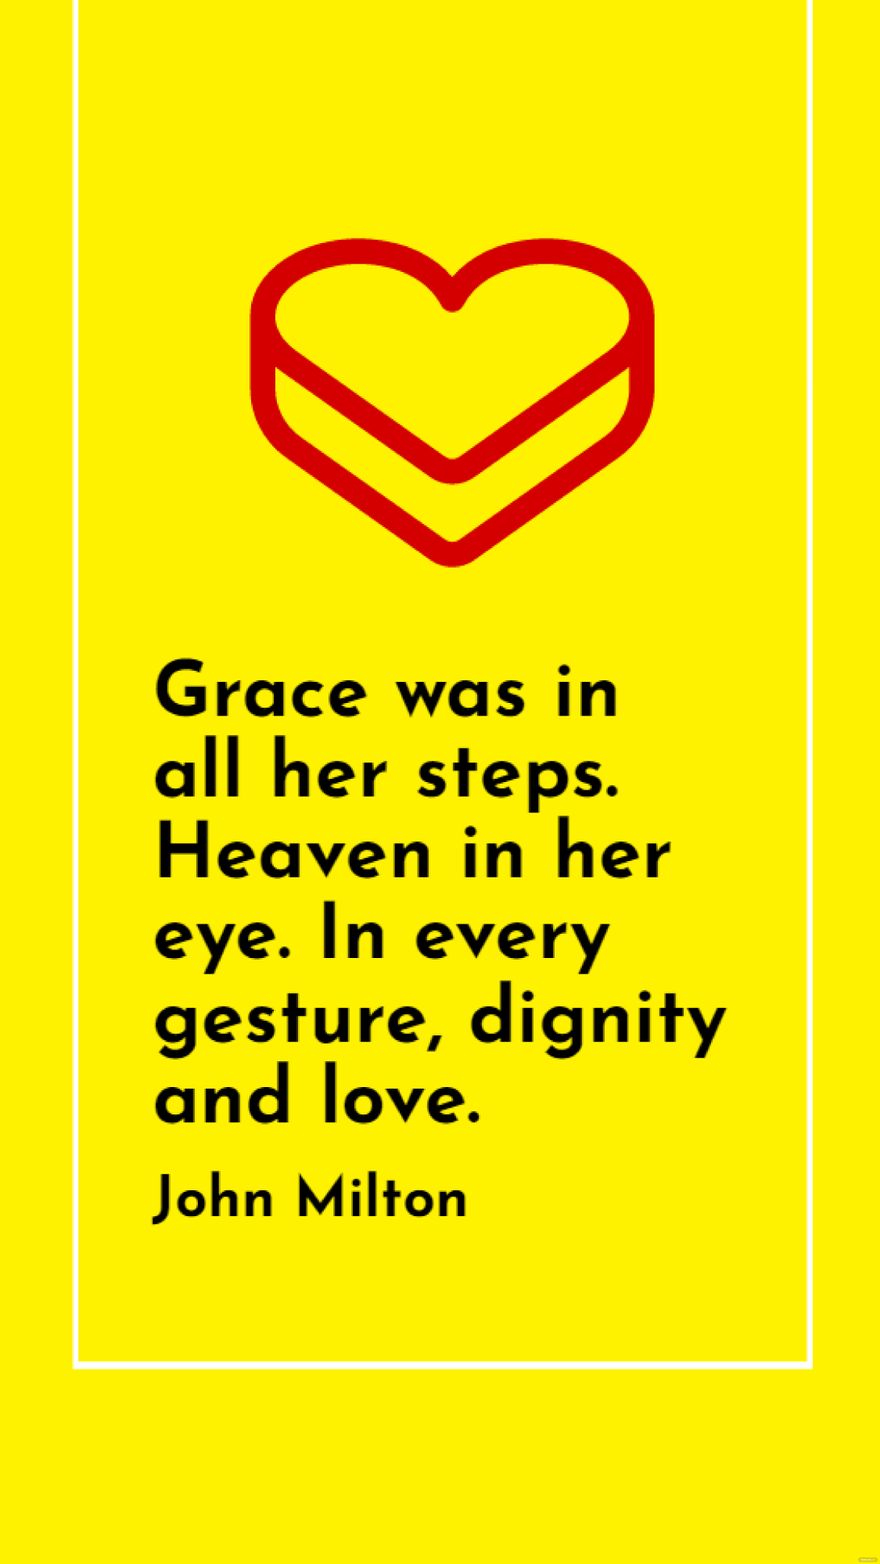 Free John Milton - Grace was in all her steps. Heaven in her eye. In every gesture, dignity and love. in JPG